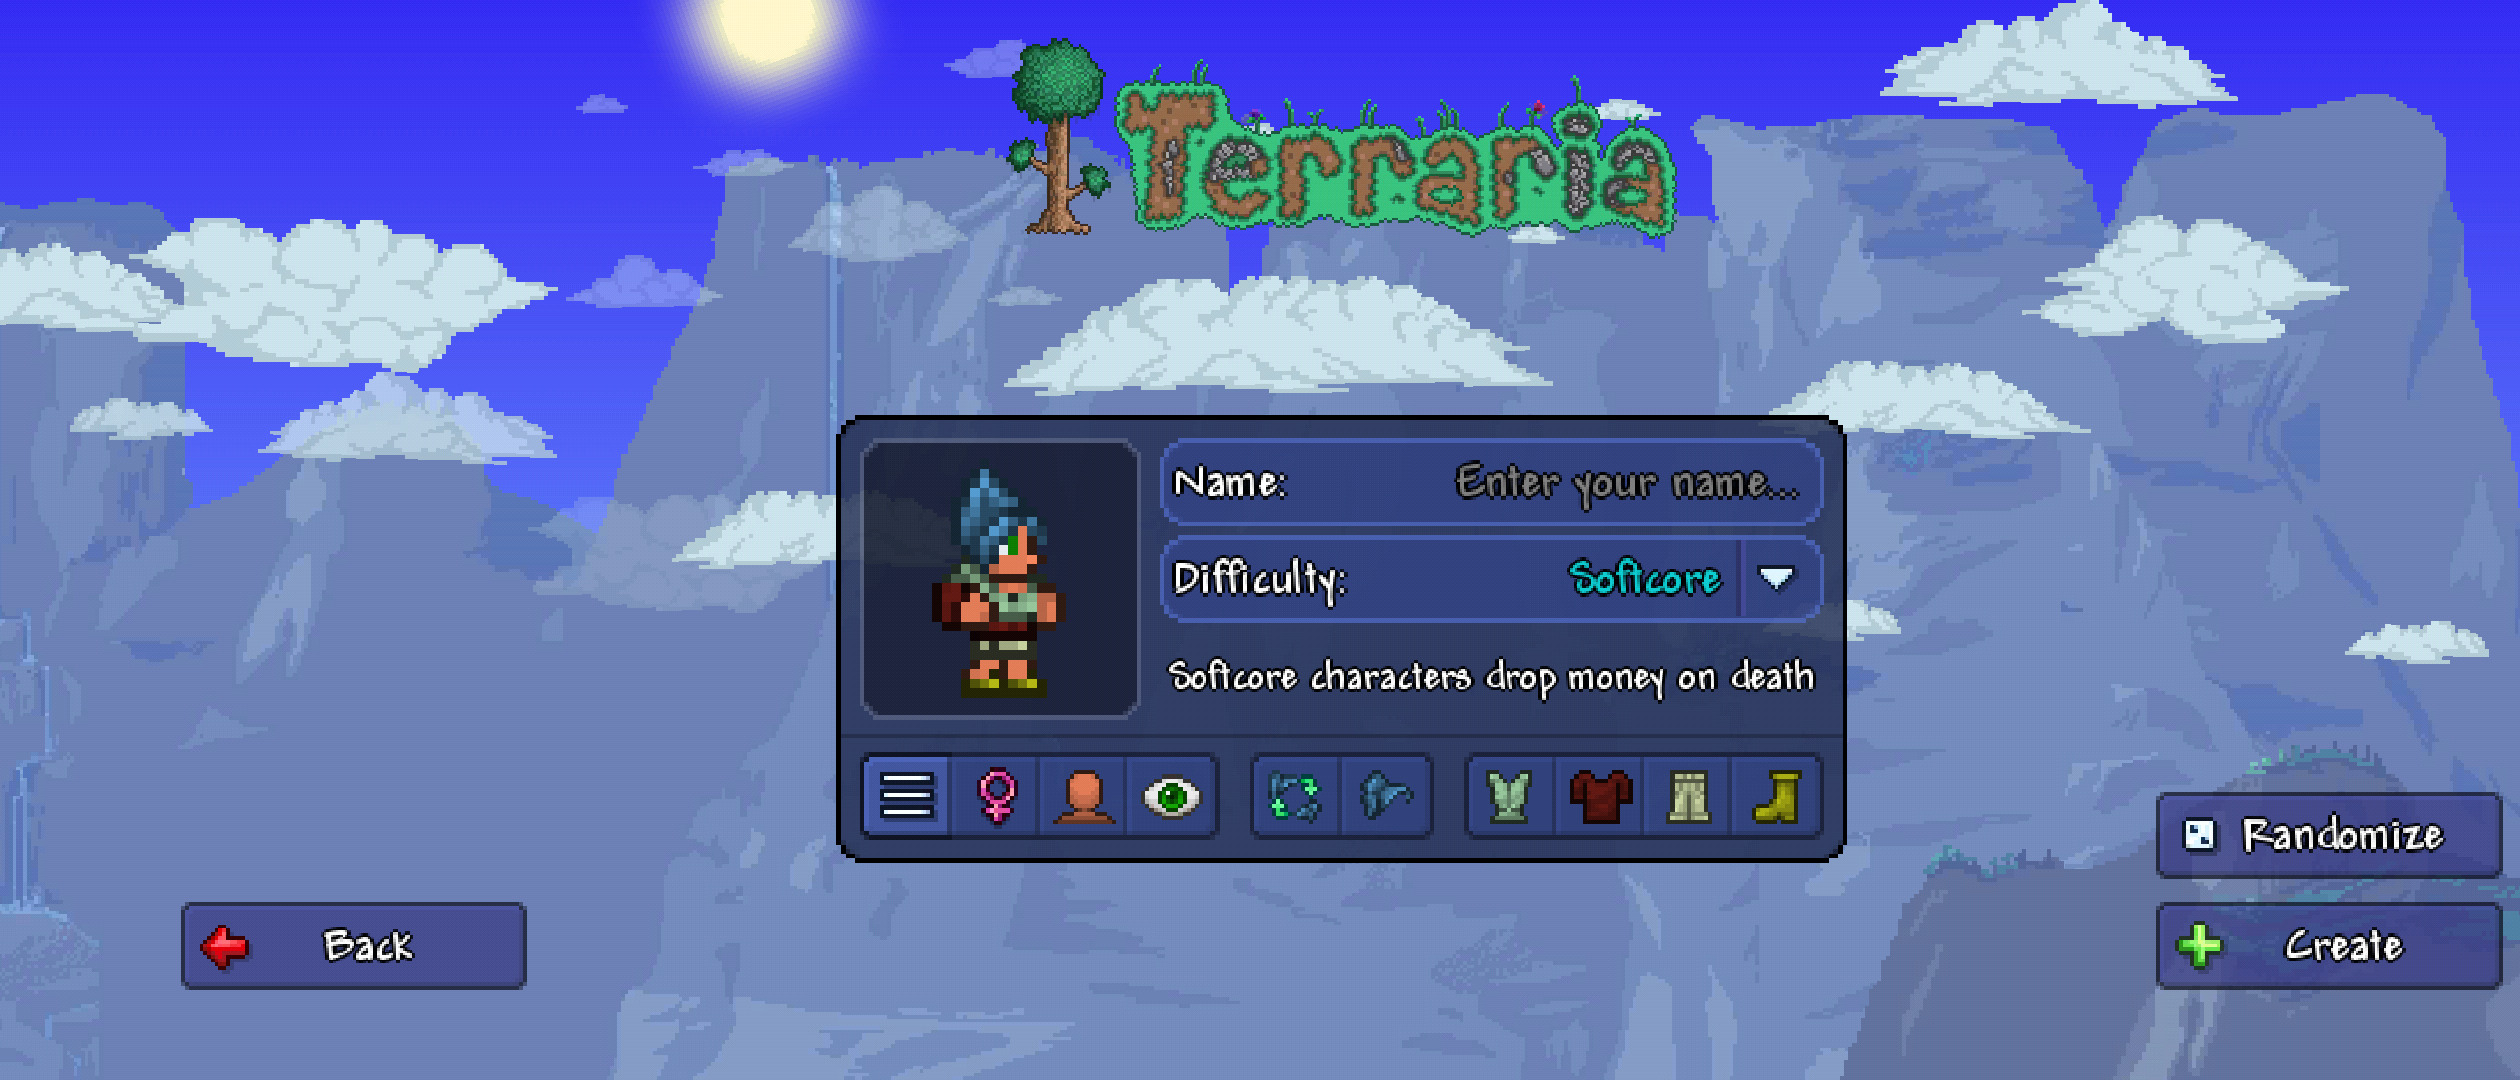 how to use terraria invedit cloud character